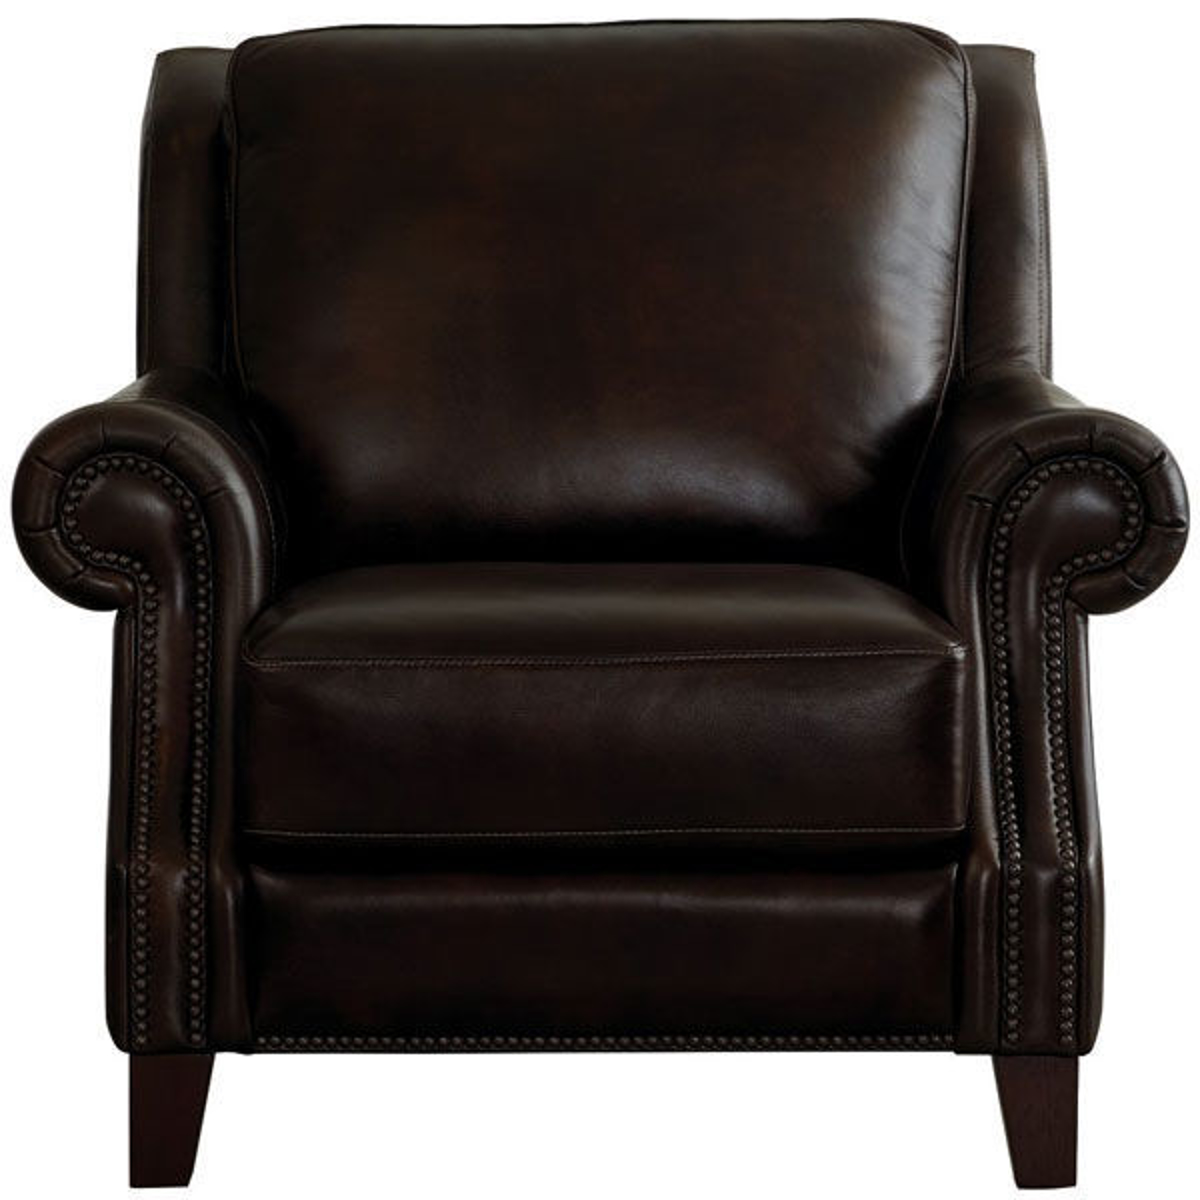 Picture of Pierce Hickory Leather Chair